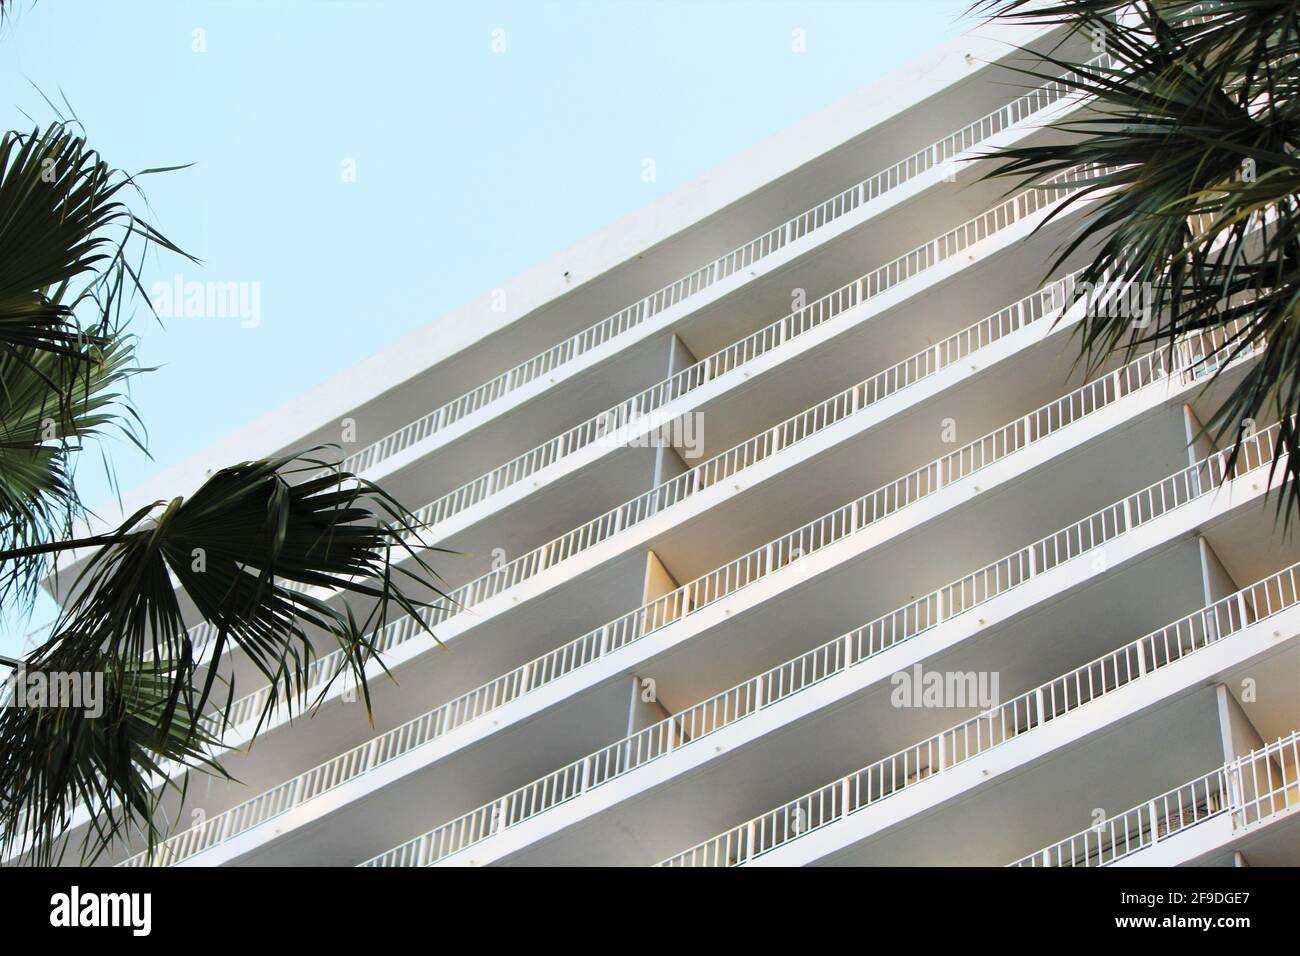 Large white residential condominium in Brickell, Miami Florida. Palm tress on the side. Stock Photo